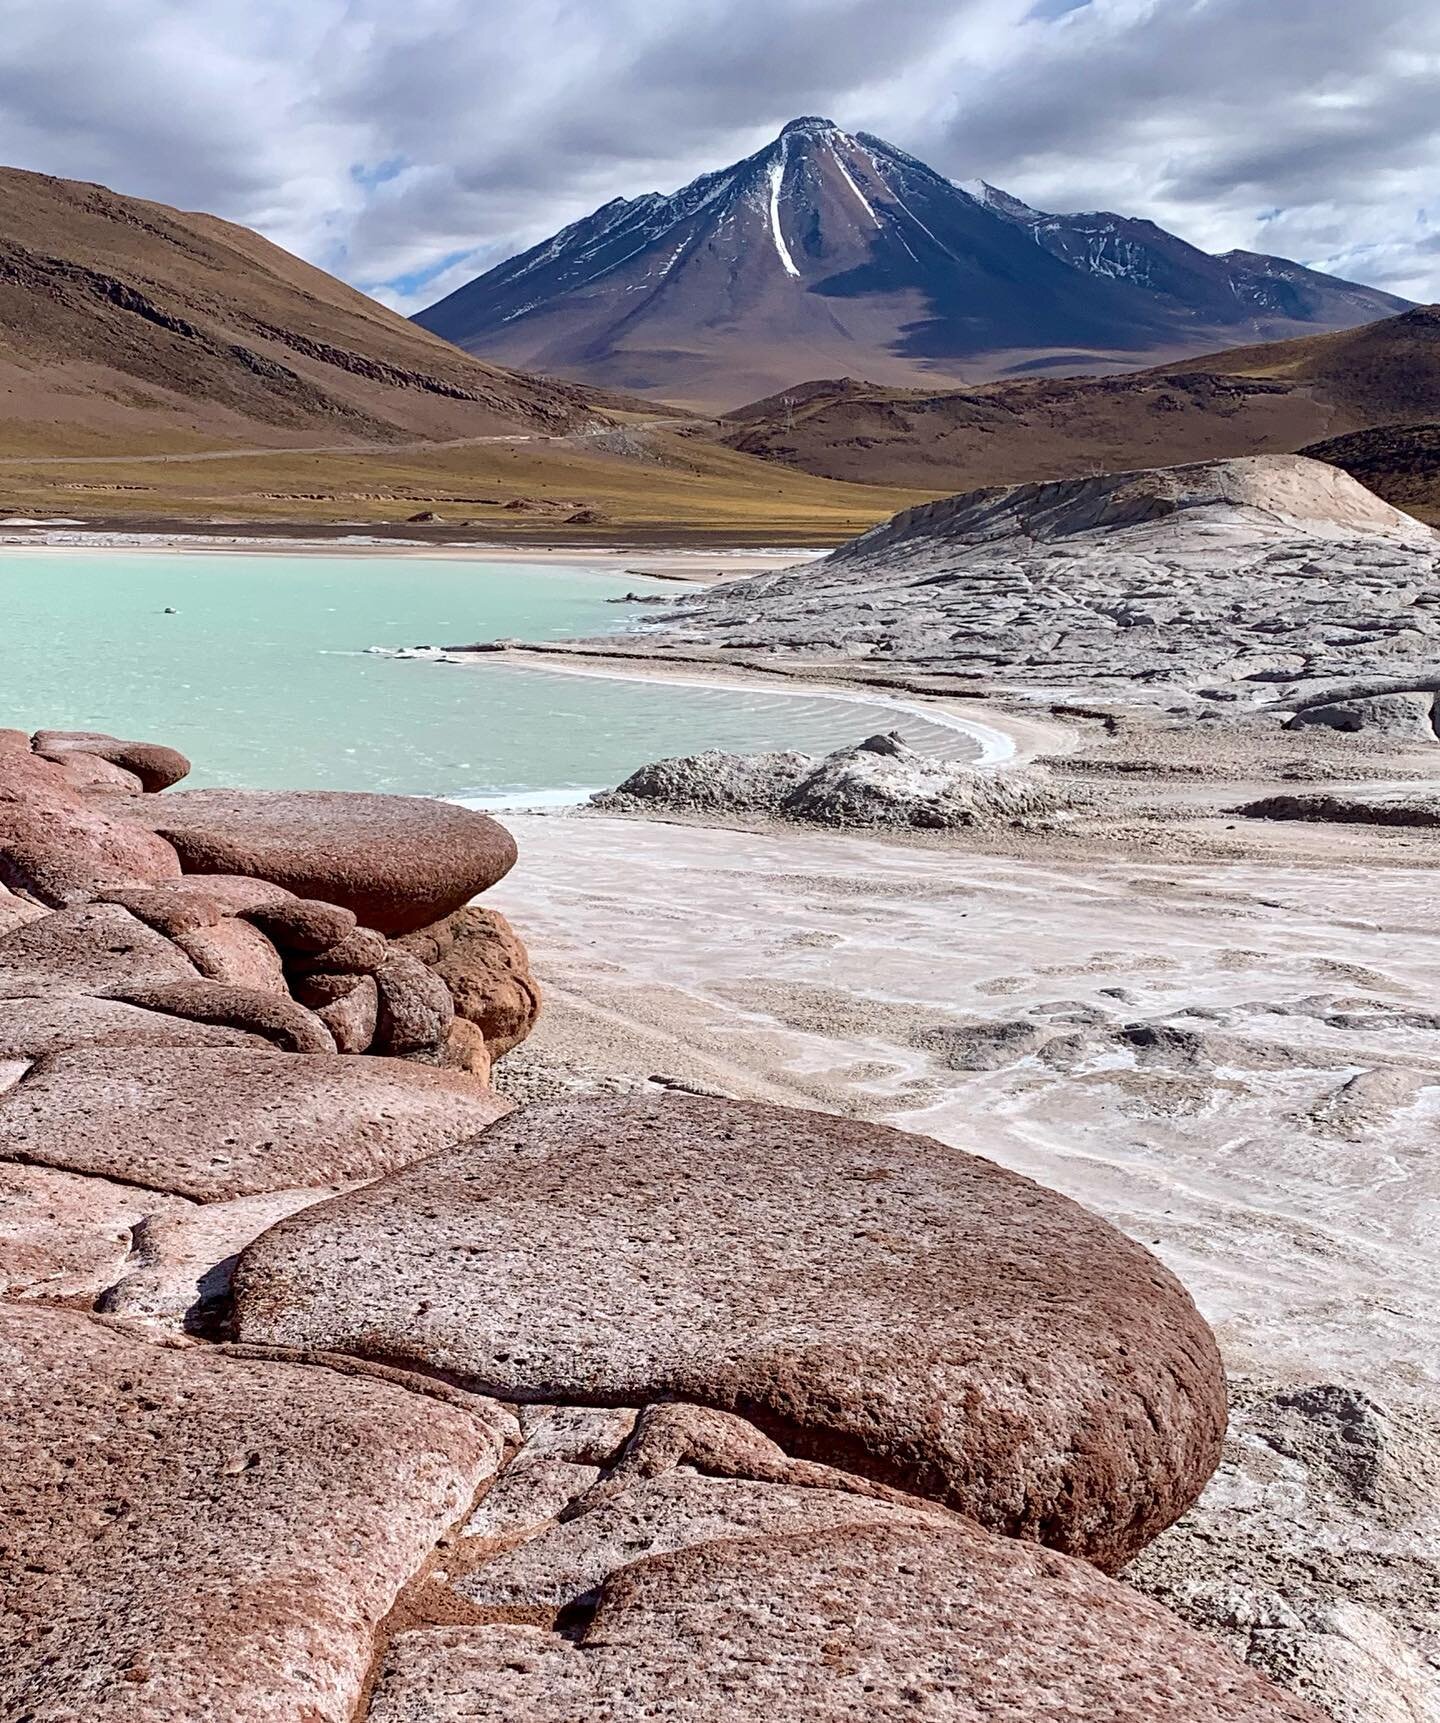 10 nights camping in Atacama Desert ⛺️&thinsp;&thinsp;
&thinsp;&thinsp;
The Atacama Desert challenges what you'd assume a &ldquo;desert&rdquo; to look and feel like (there are snow-capped volcanoes, lakes, thermal baths and geysers, but also patches 